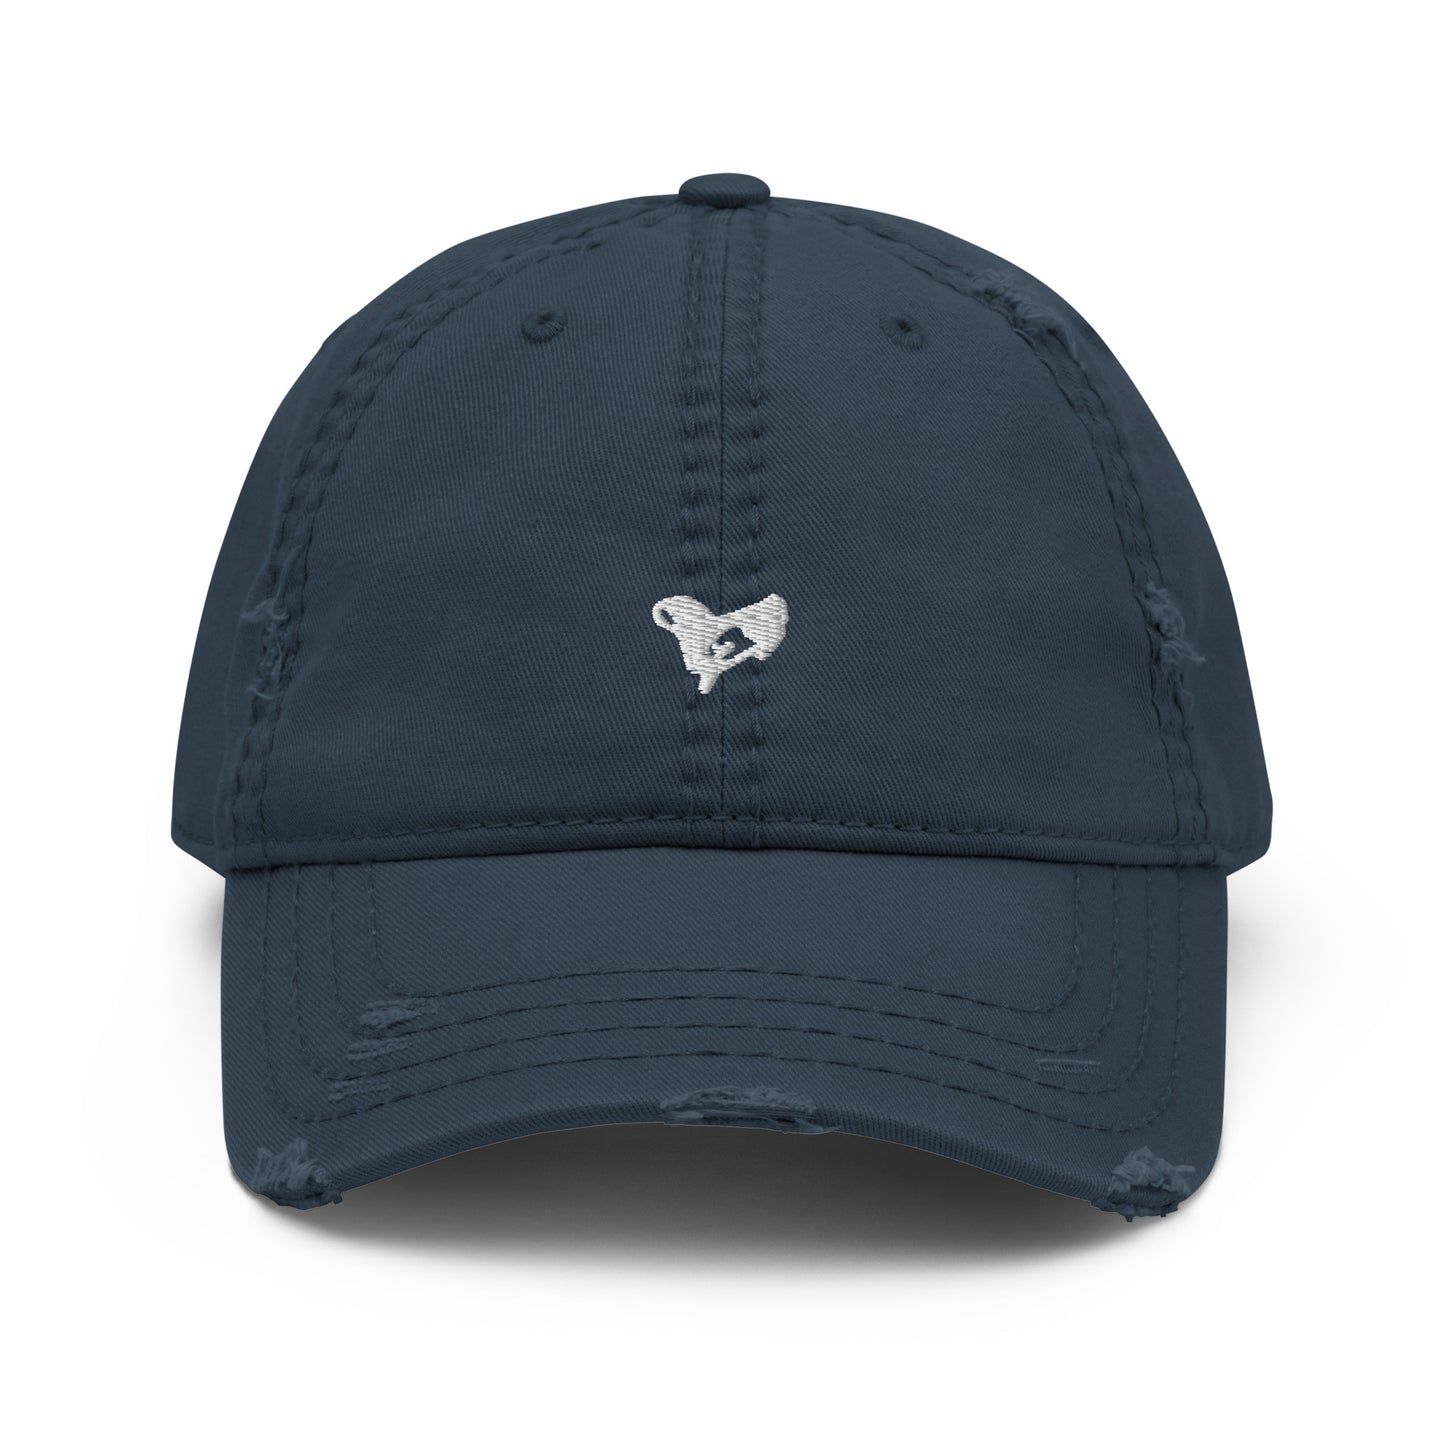 iheartu™️ Embroidered White Logo Distressed Hat